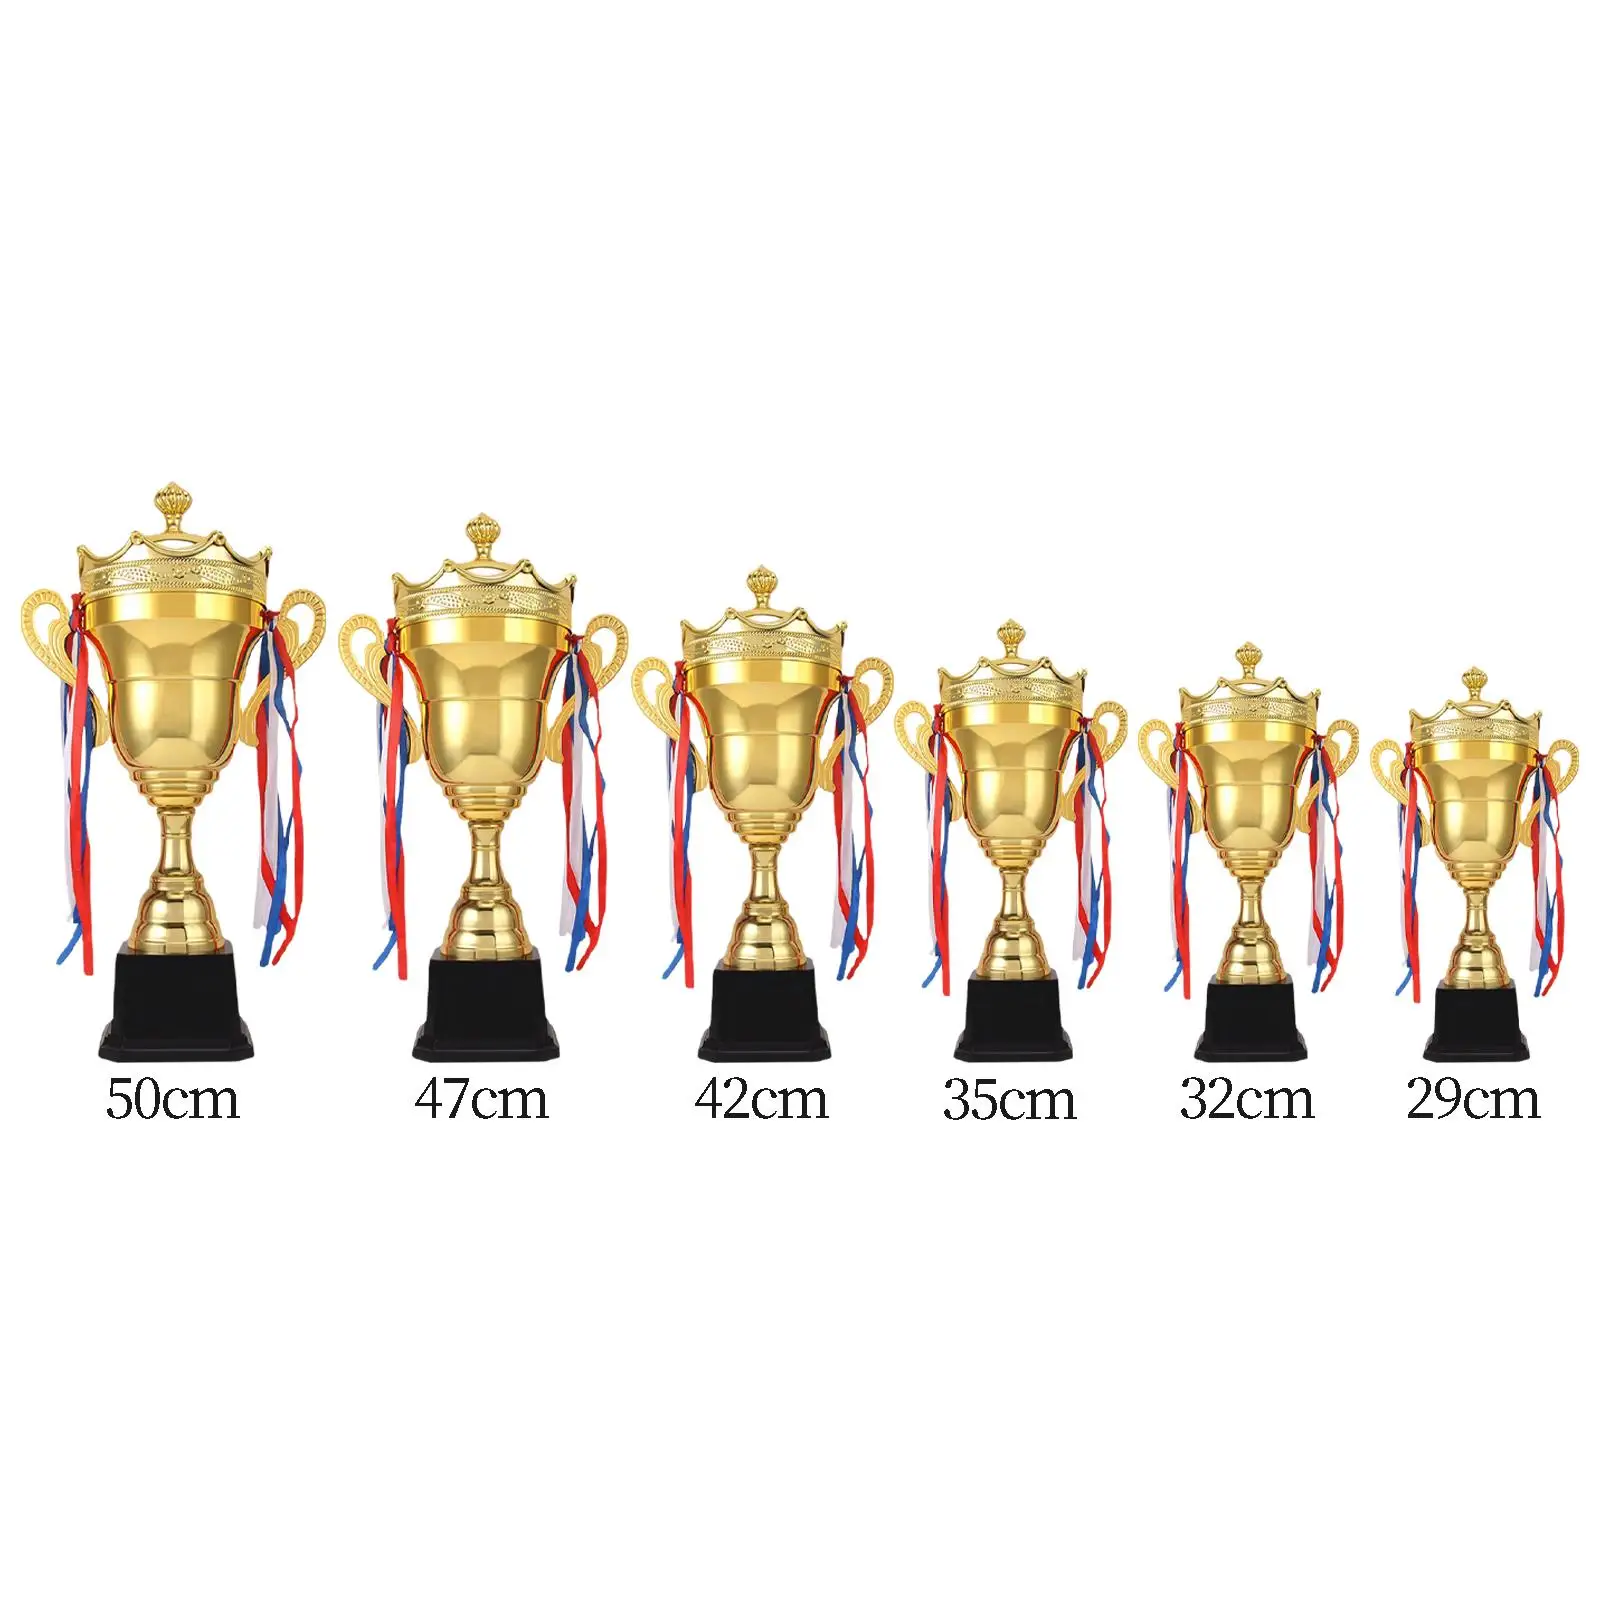 Trophy Cup Metal Decor Party Favors for Award Competitions Classroom Sports Championships Tournaments Football Soccer Baseball